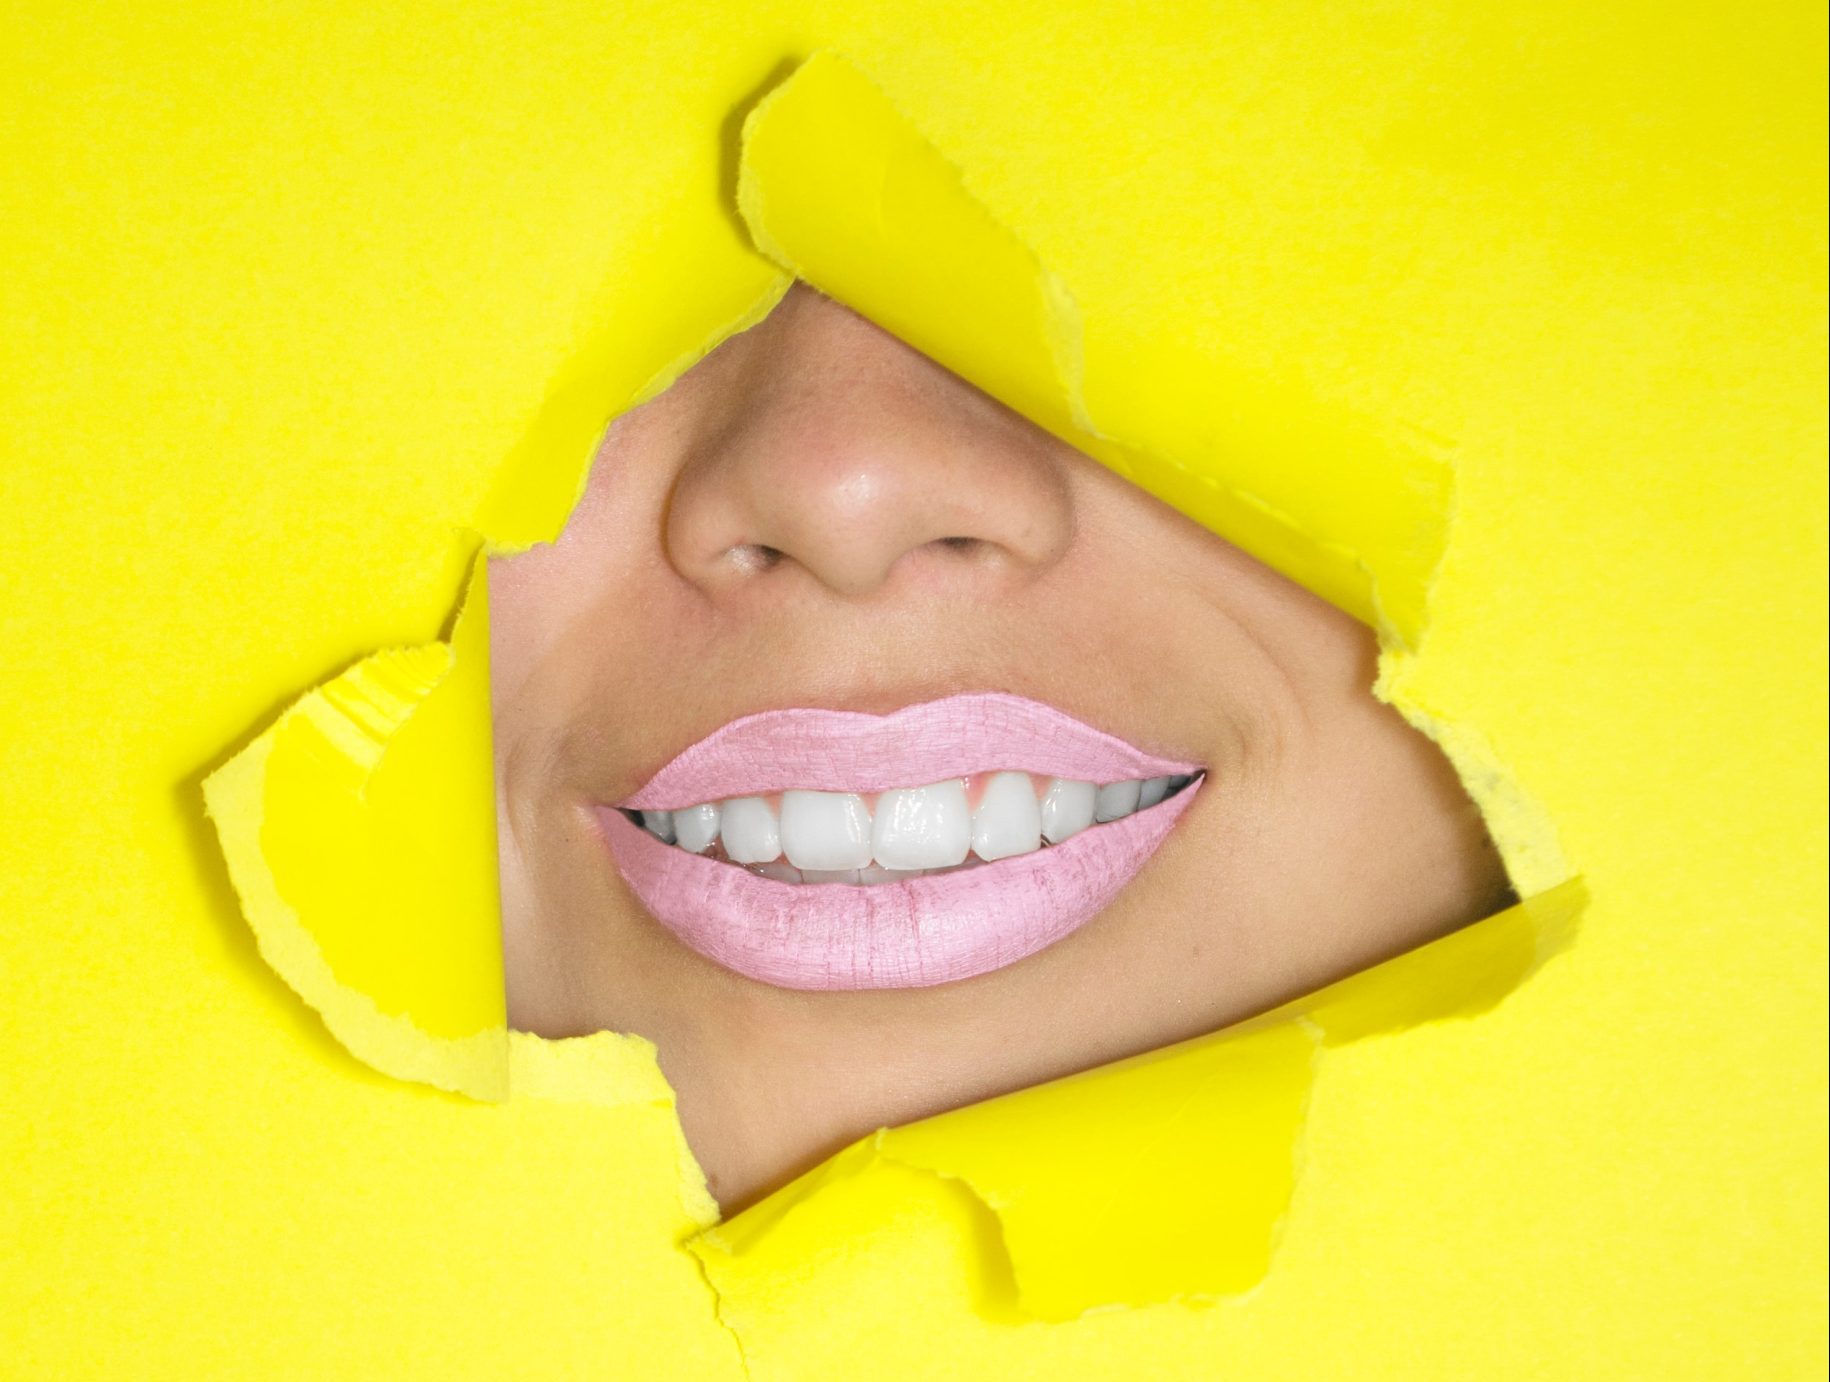 A toothy smile against a yellow backdrop